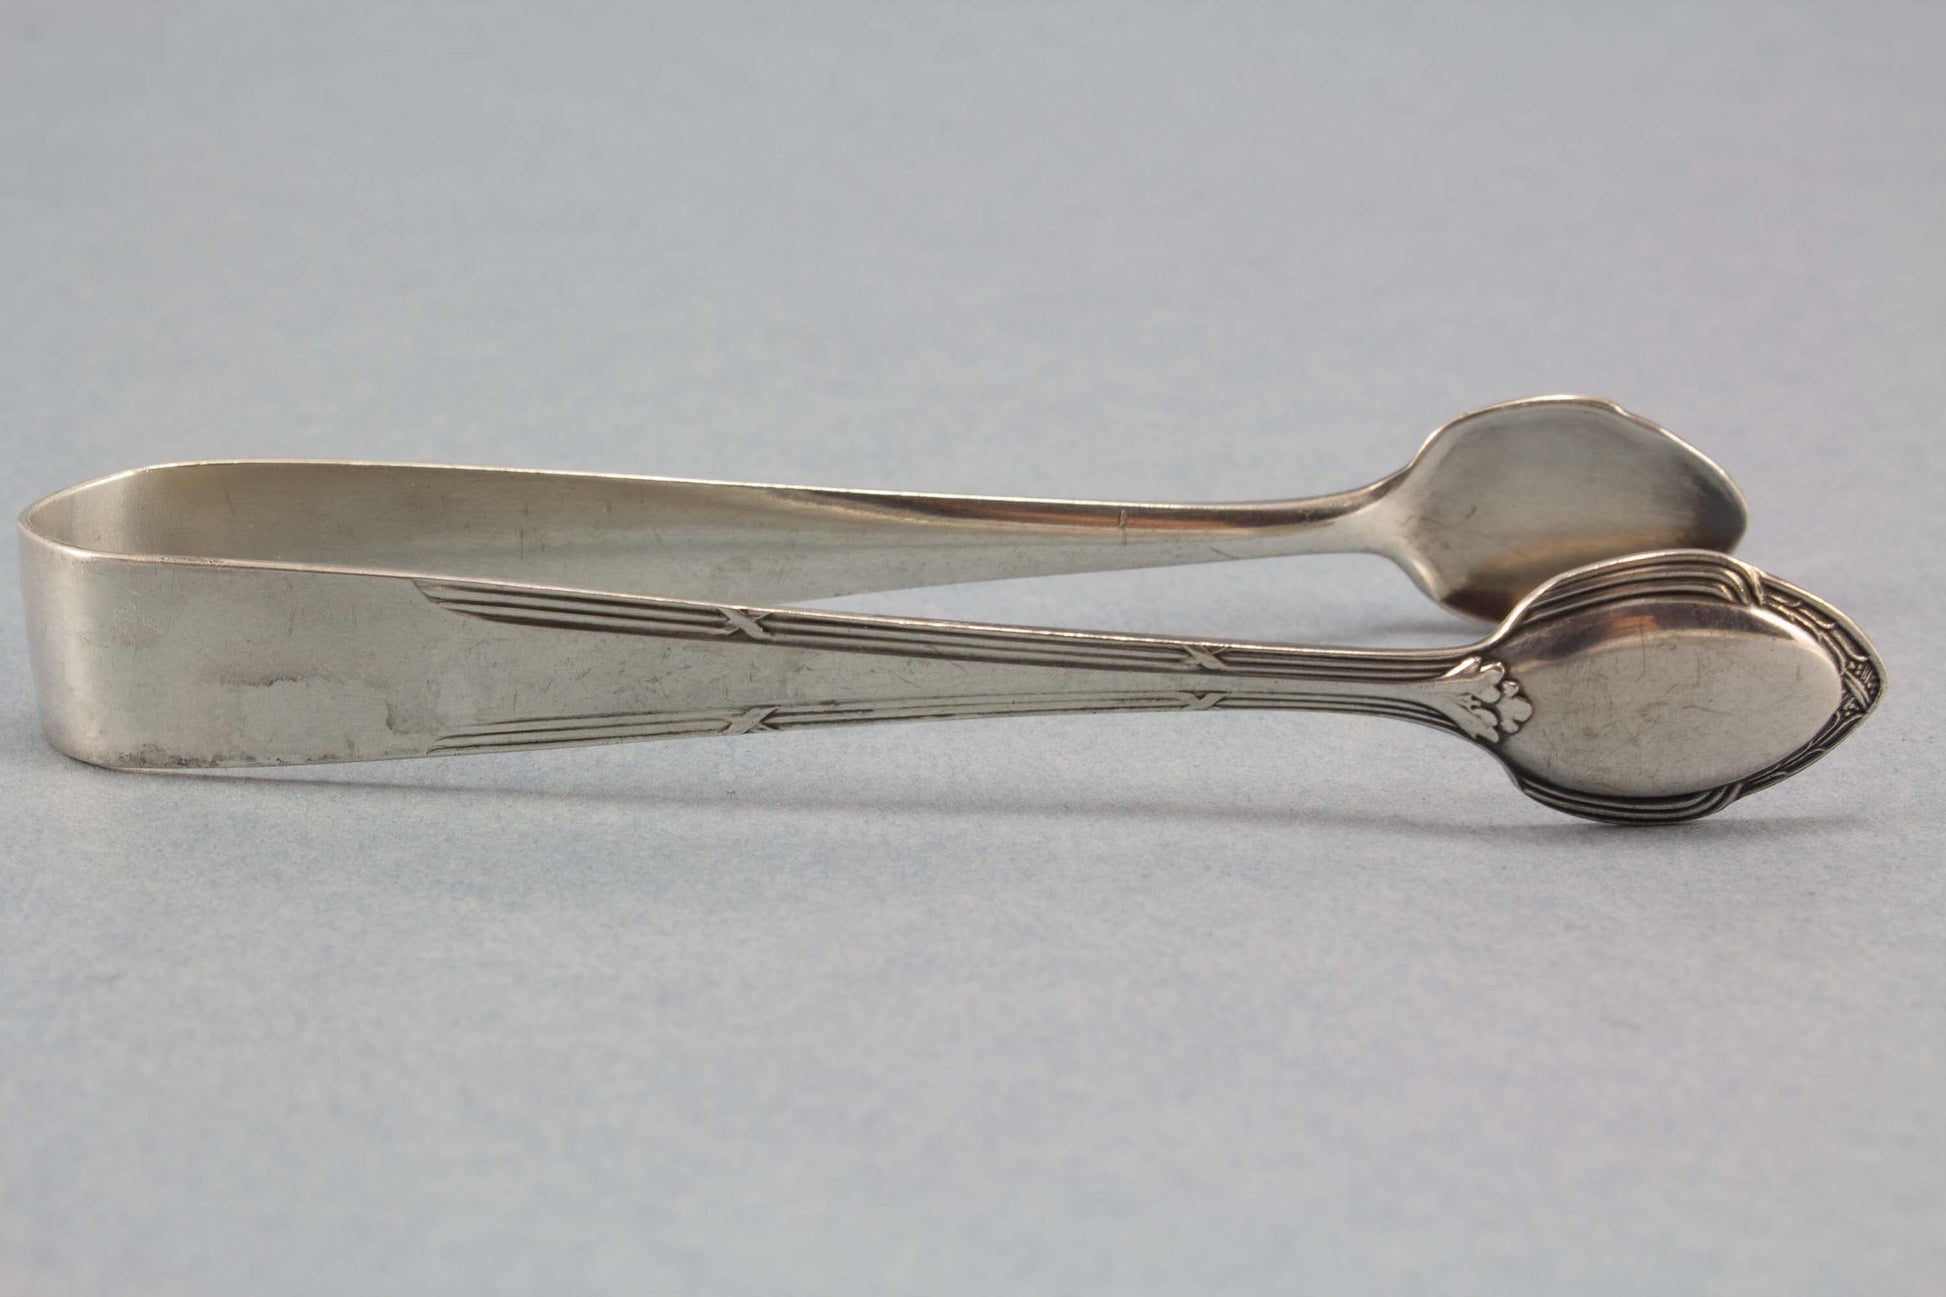 Sugar tongs, Art Nouveau, old tongs, silver-plated, WMF 200, antique